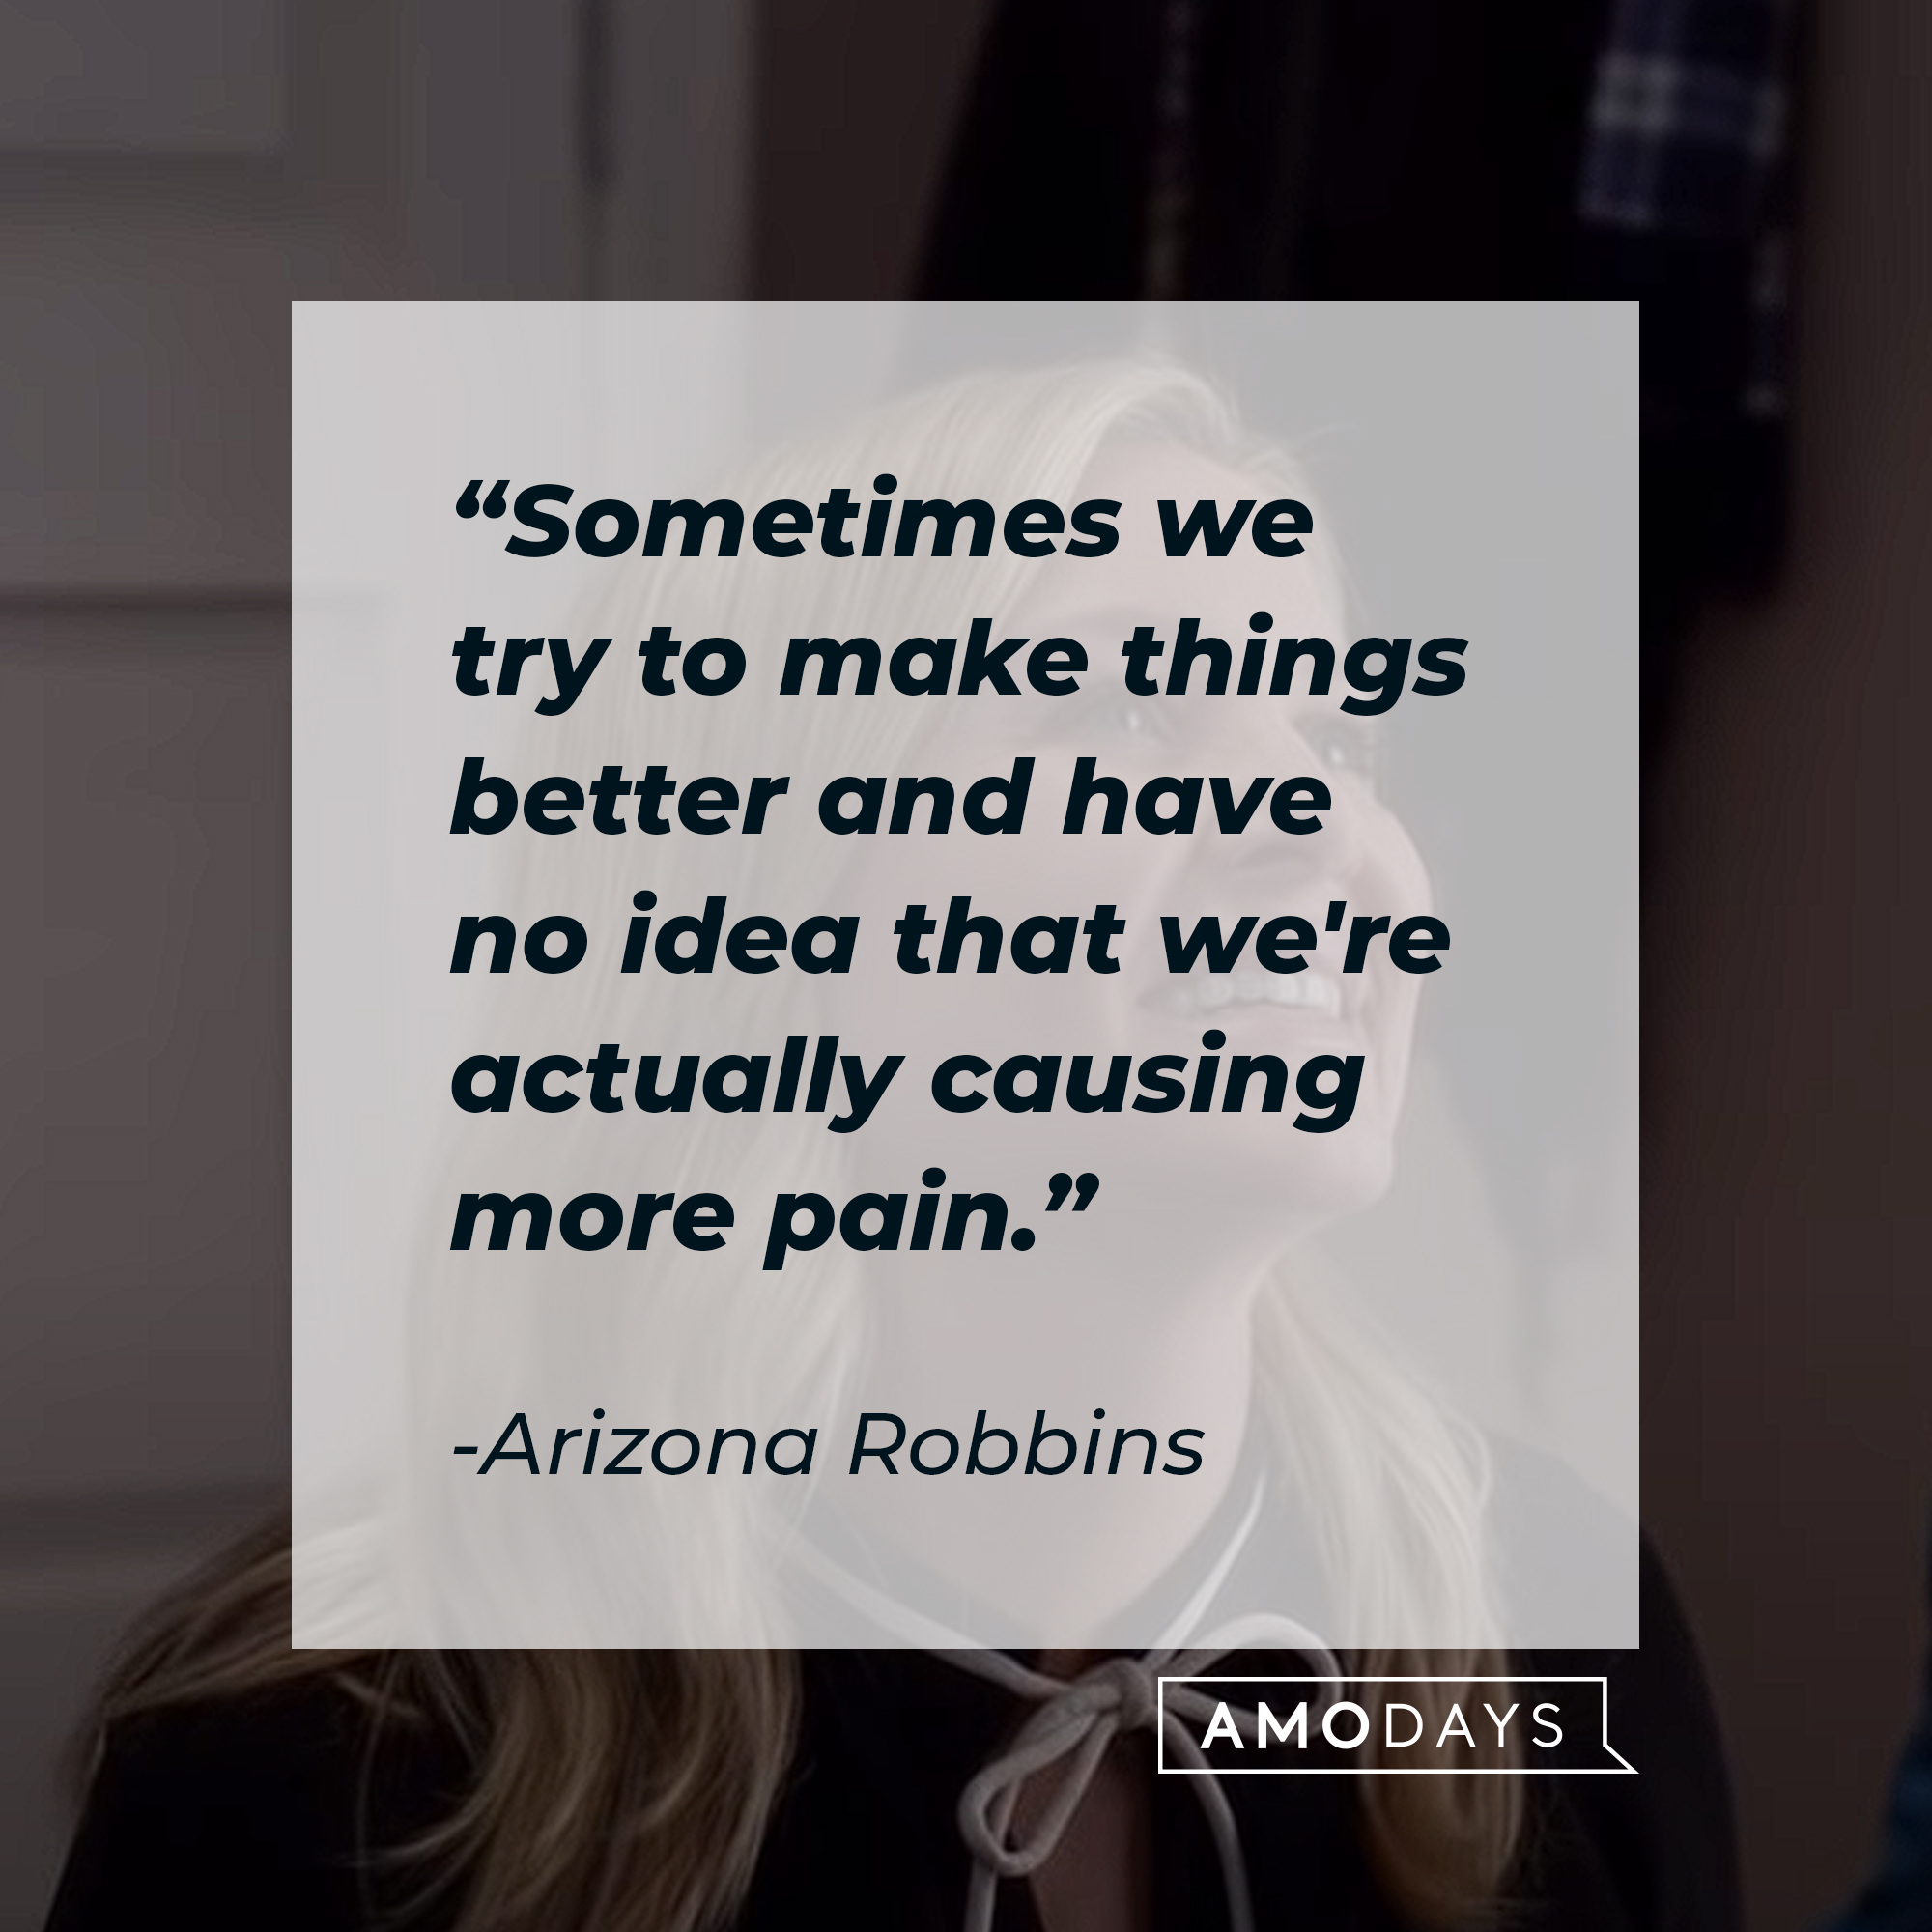 A picture of Arizona Robbins with her quote: "Sometimes we try to make things better and have no idea that we're actually causing more pain." | Image: AmoDays